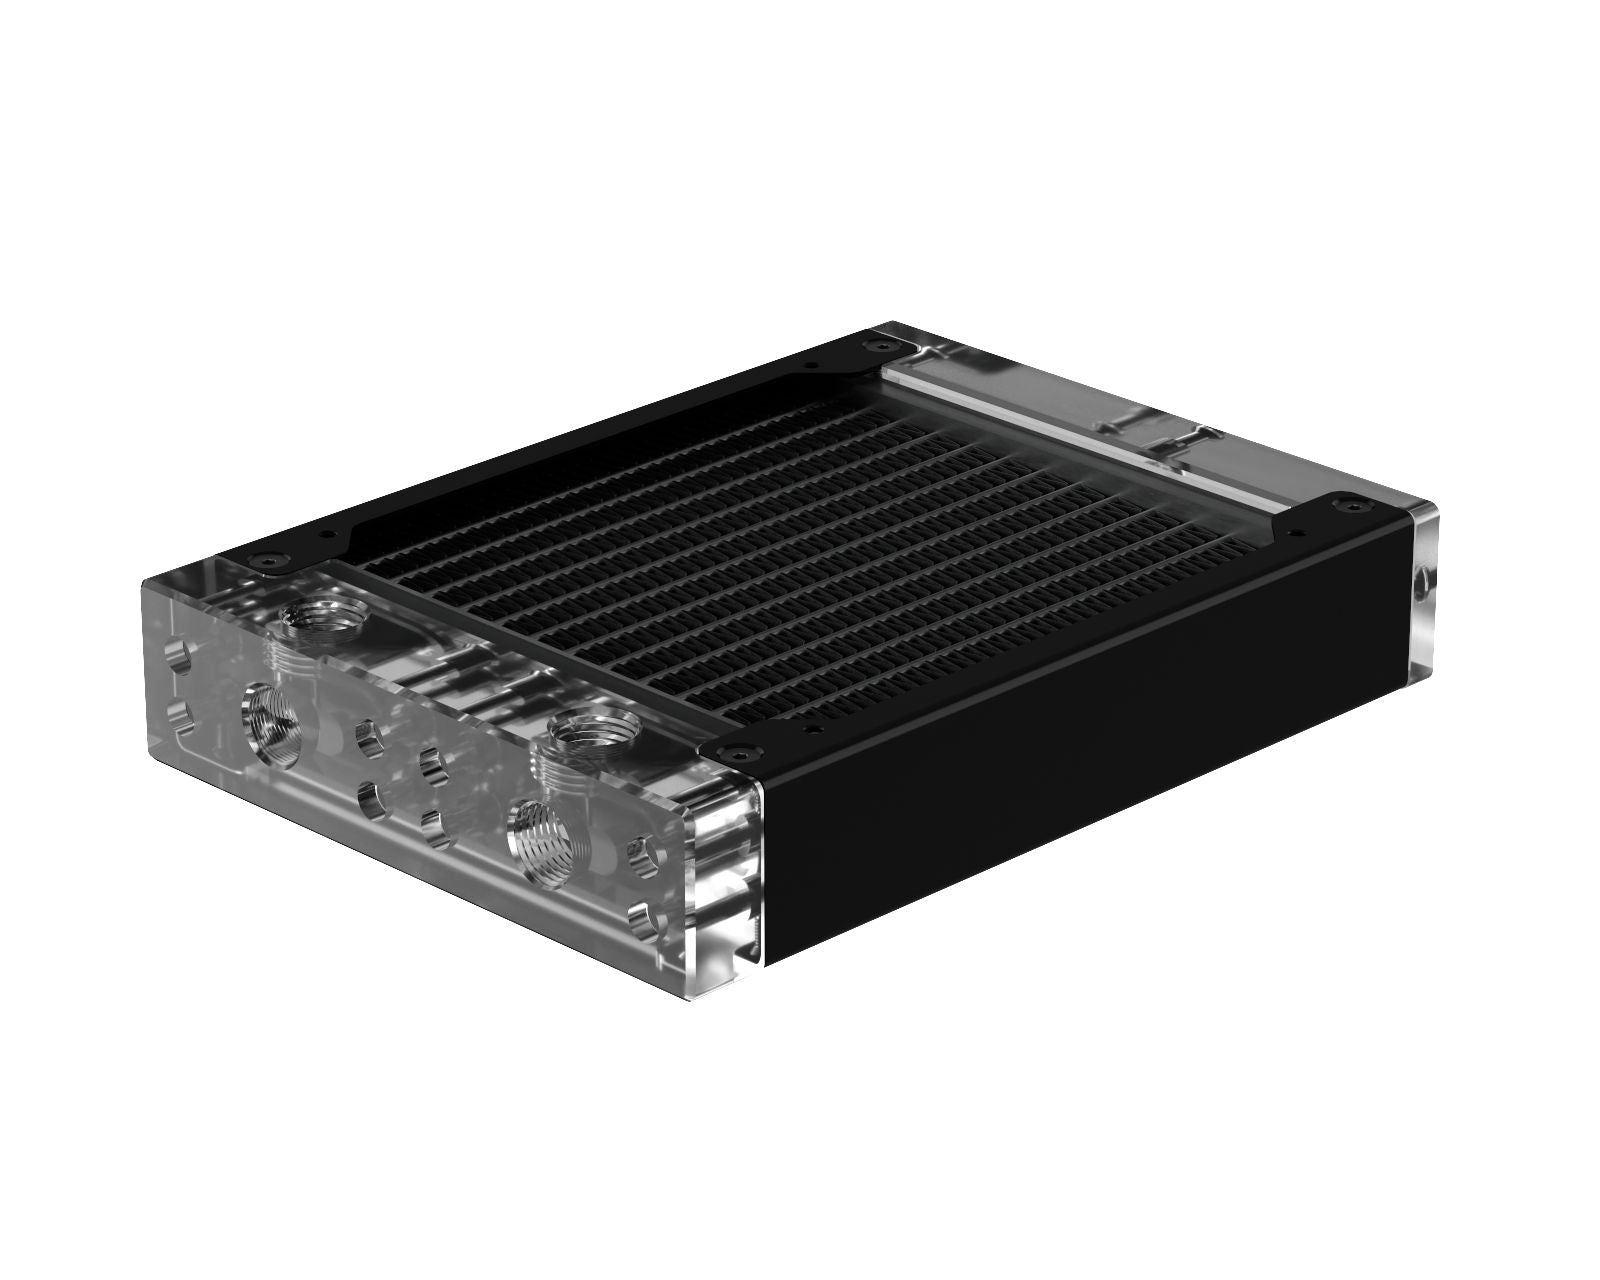 PrimoChill 120SL (30mm) EXIMO Modular Radiator, Clear Acrylic, 1x120mm, Single Fan (R-SL-A12) Available in 20+ Colors, Assembled in USA and Custom Watercooling Loop Ready - Satin Black